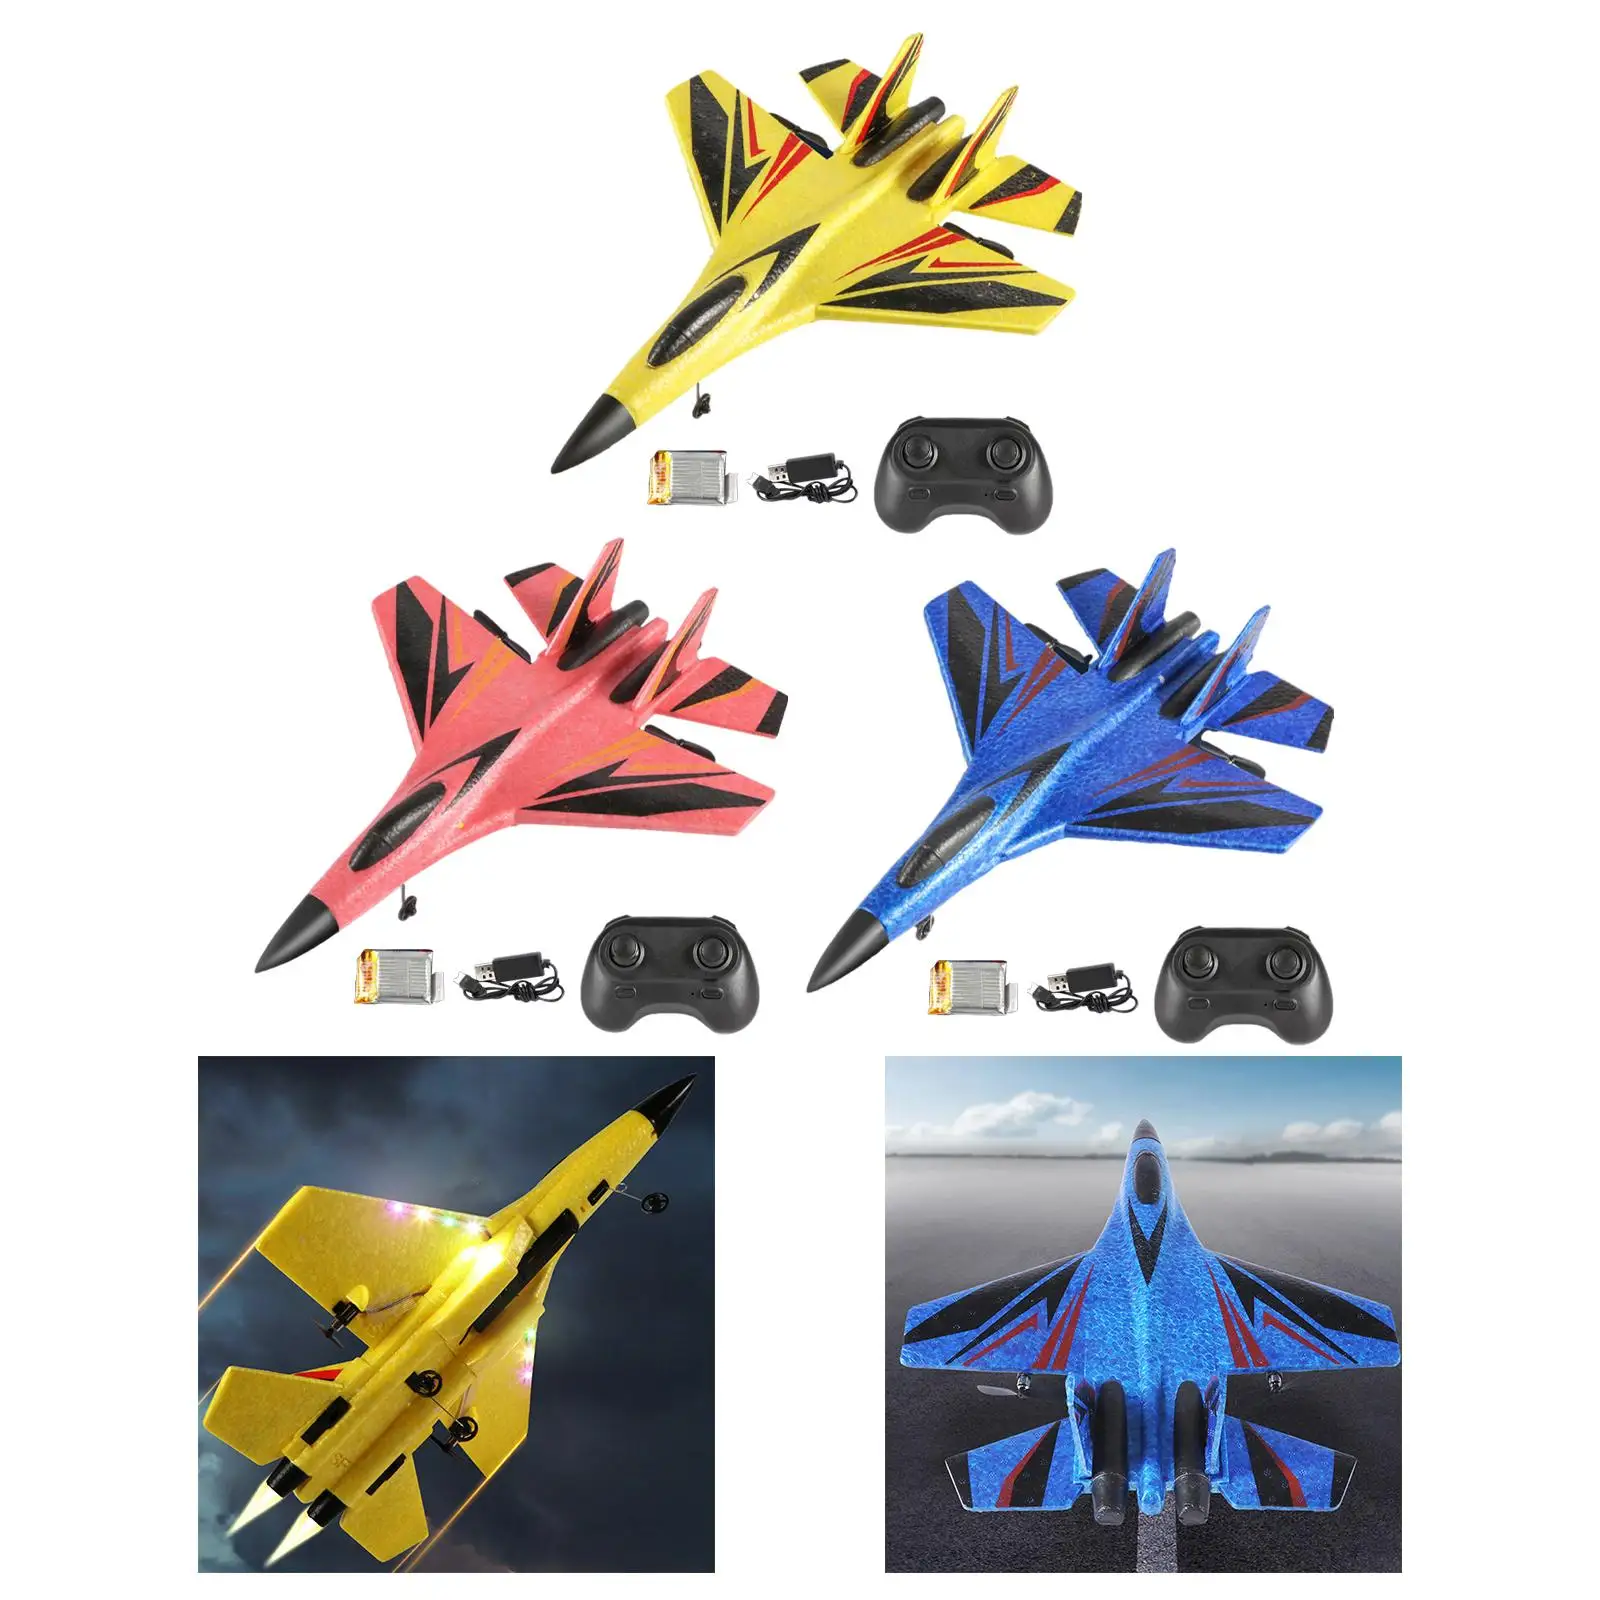 Foam RC Glider SU30 RC Airplane Easy to Control Durable Lightweight Fighter Jet Toy for Kids Beginner Children Boys Girls Adults